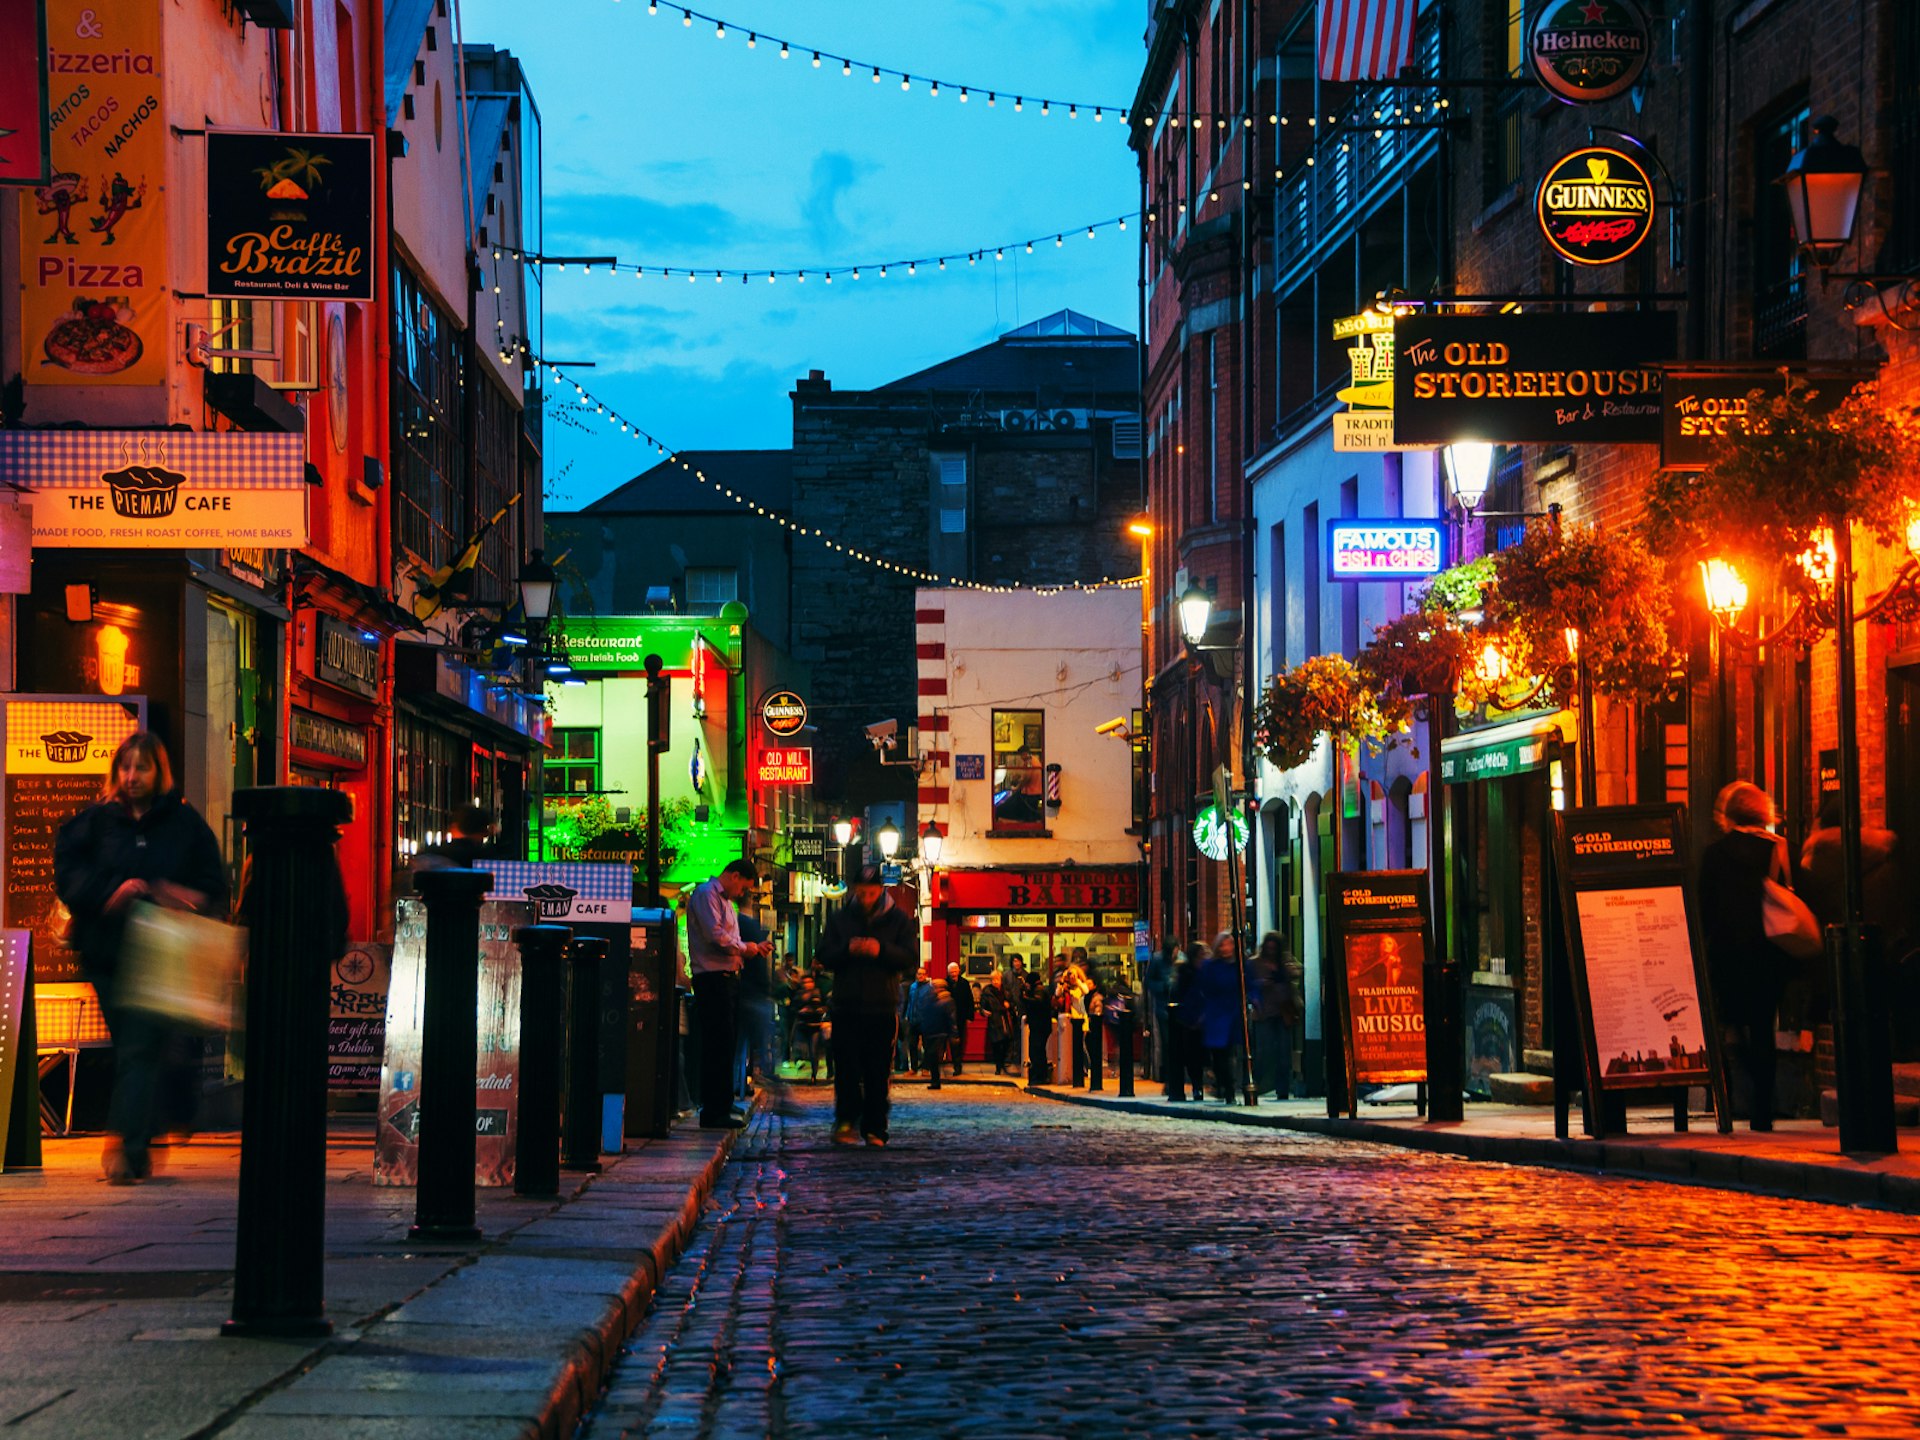 Dublin after dark: a view of the pubs and bars down a street of the Temple Bar area in Dublin